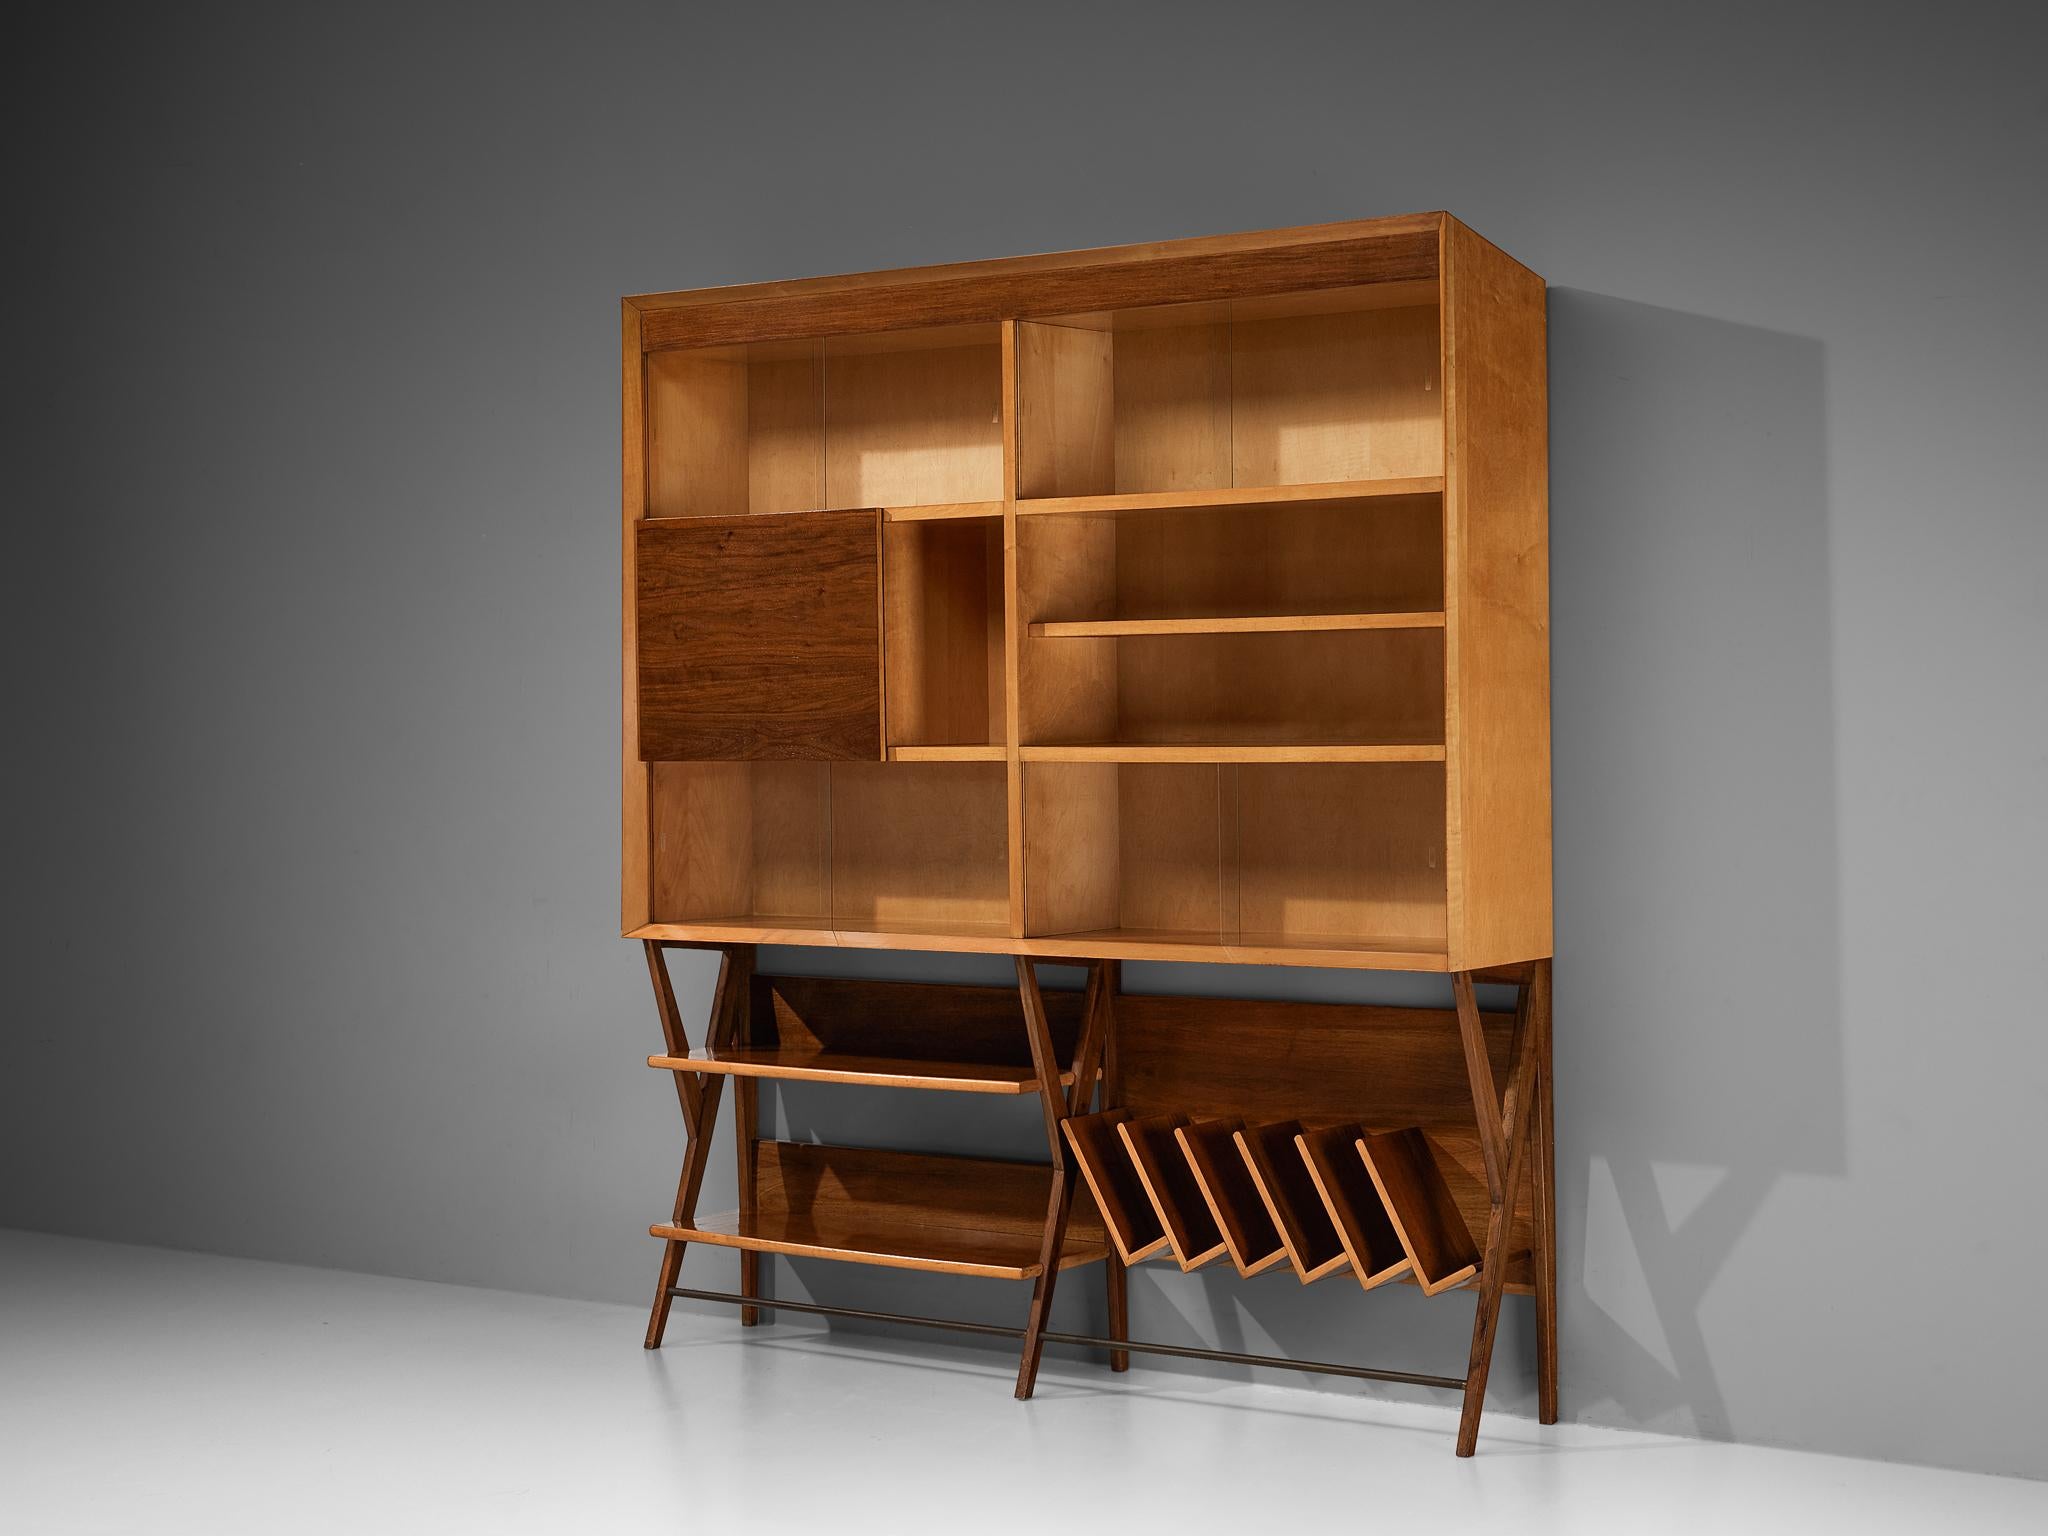 Gustavo & Vito Latis, highboard or showcase library, maple, walnut, glass, brass, Italy, circa 1960

Beautiful showcase made in Italy in the 1960s. Executed in maple and walnut, this piece is elevated by the beautiful mixed materials they are made